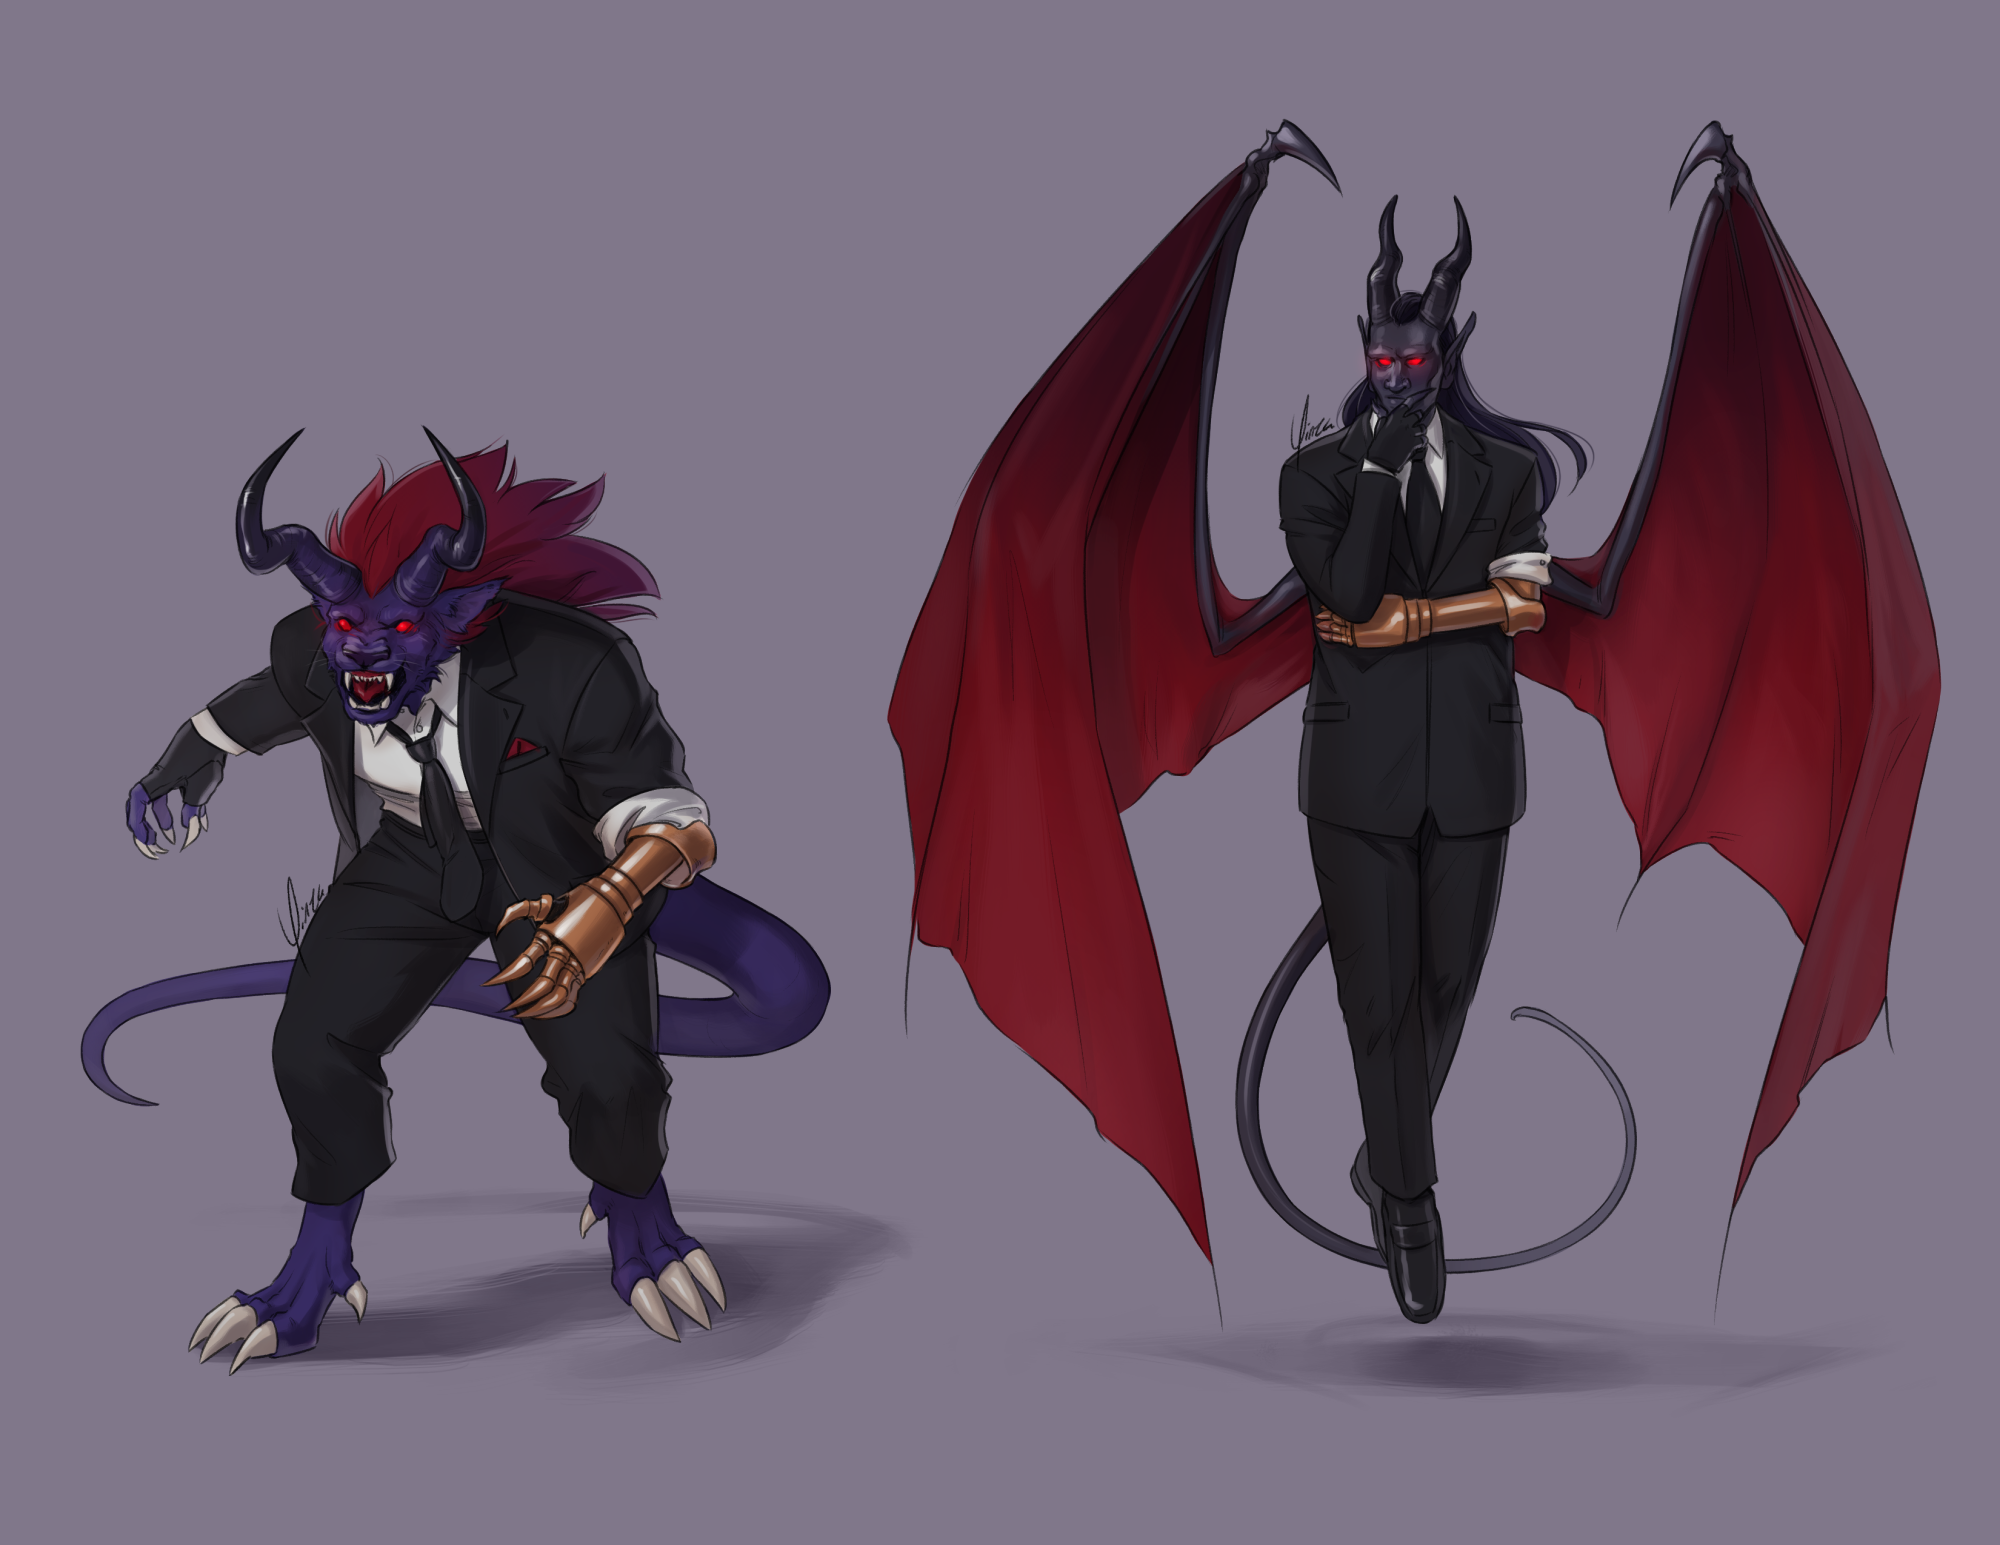 A pair of drawings of Galian Beast and Chaos in black suits. Their designs are slightly different from canon; both still have Vincent's gold claw in place of the left forearm, and Chaos has a slighter frame with long dark hair and a long thin tail. Galian Beast wears his suit jacket open with a red handkerchief tucked in the pocket, and he is stepping forward and snarling. Chaos hovers above the ground, his hand to his chin as he regards the viewer thoughtfully.